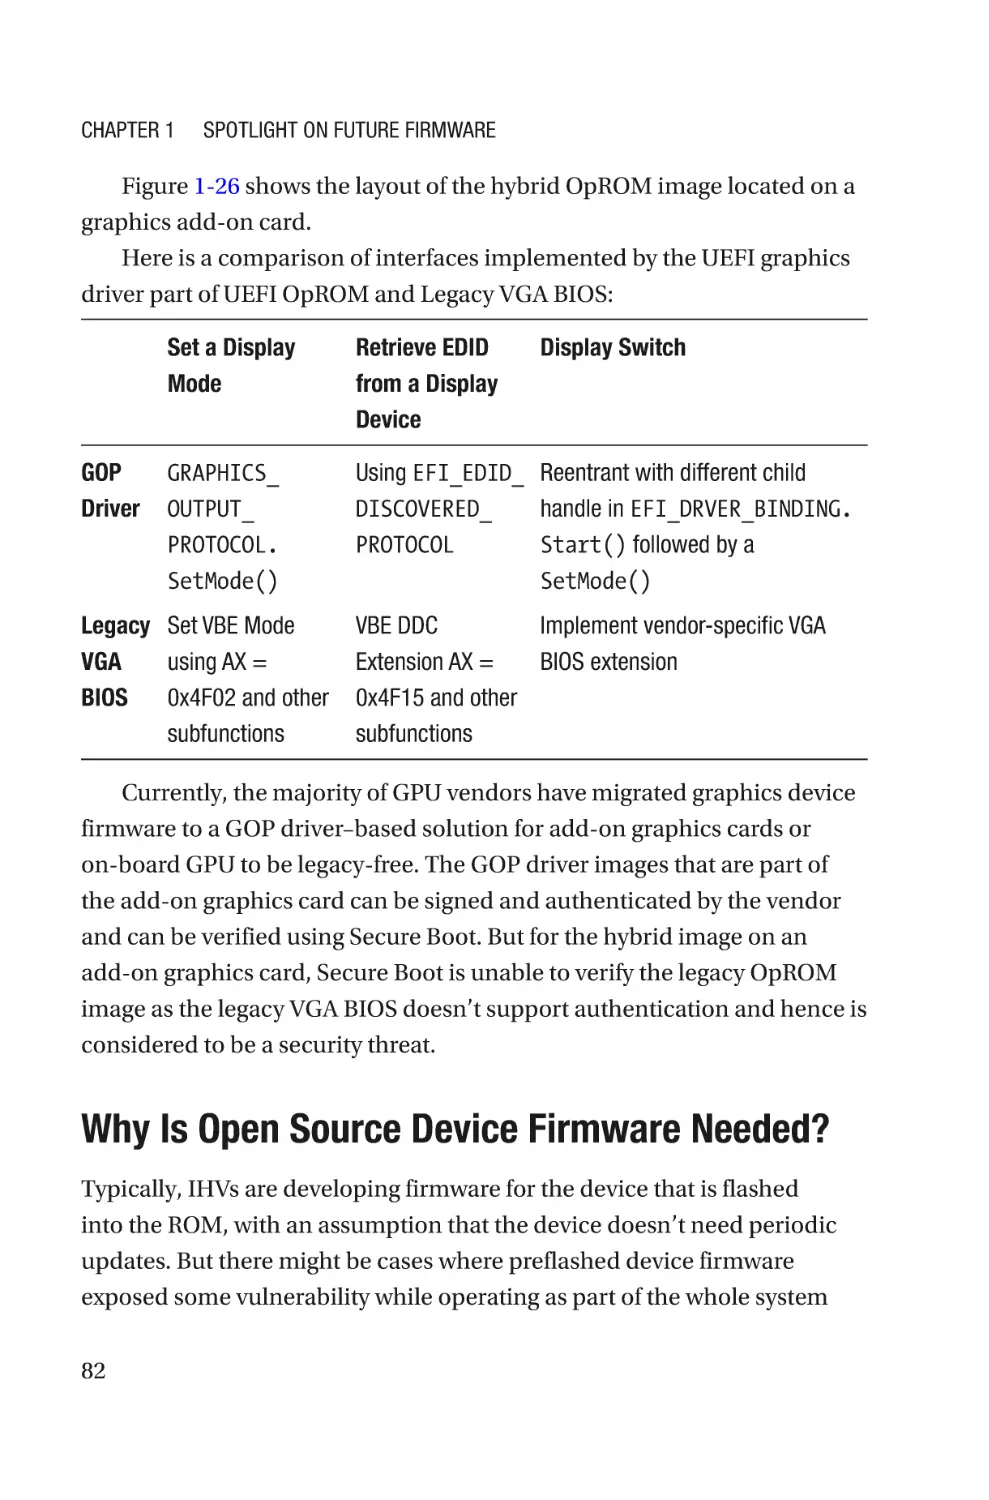 Why Is Open Source Device Firmware Needed?